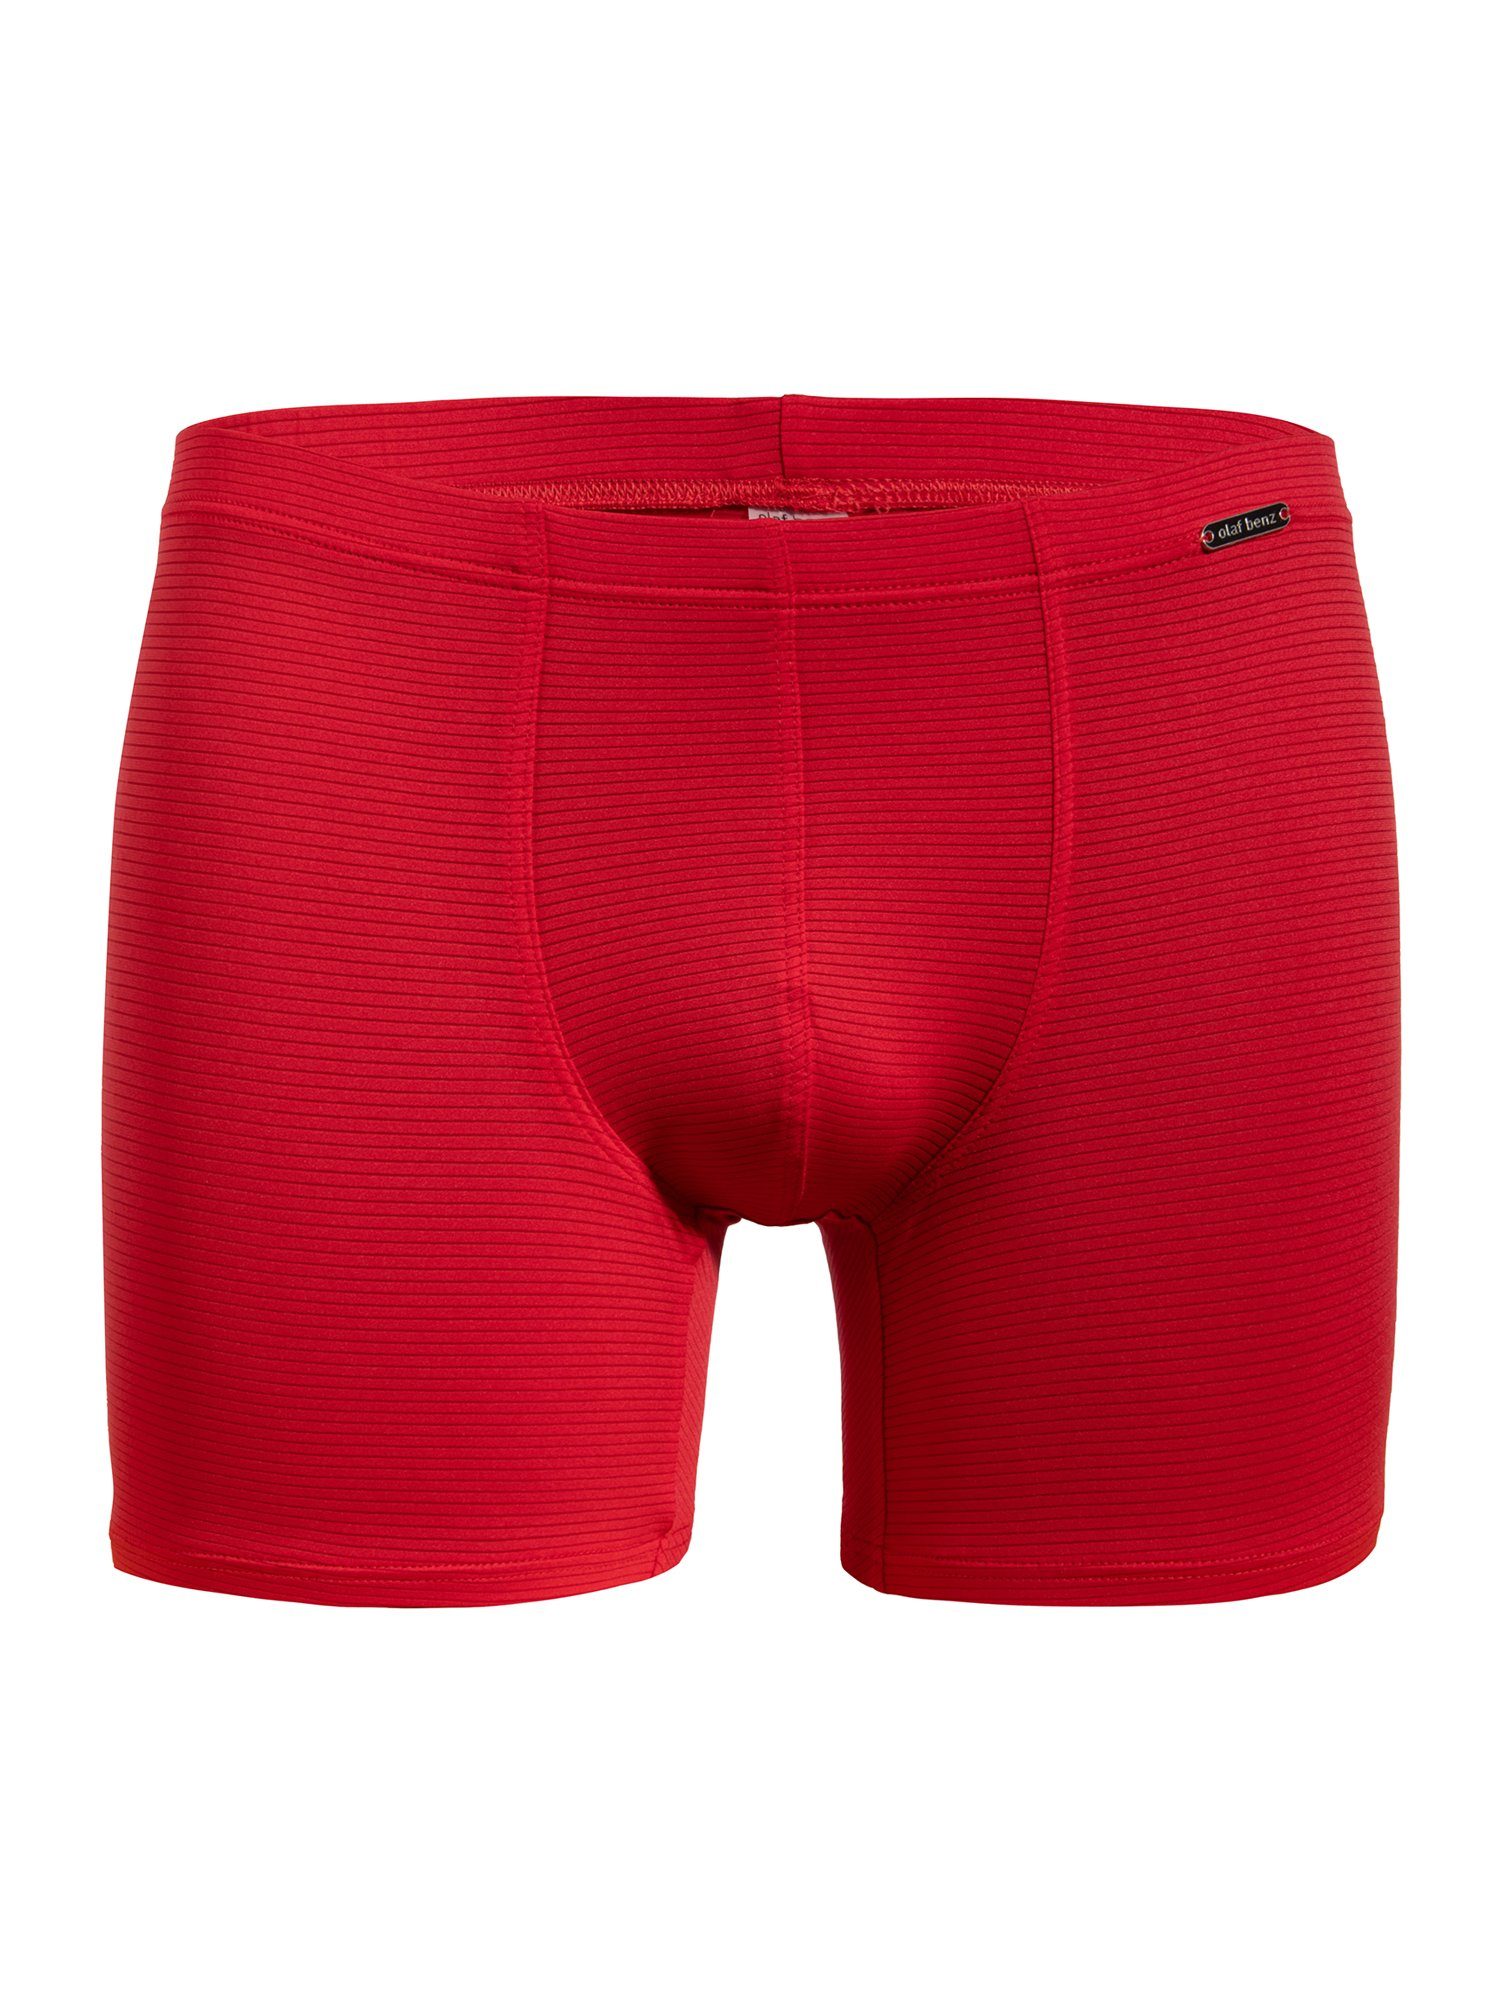 Retro Benz Olaf Boxer RED1201 (1-St) Boxerpants